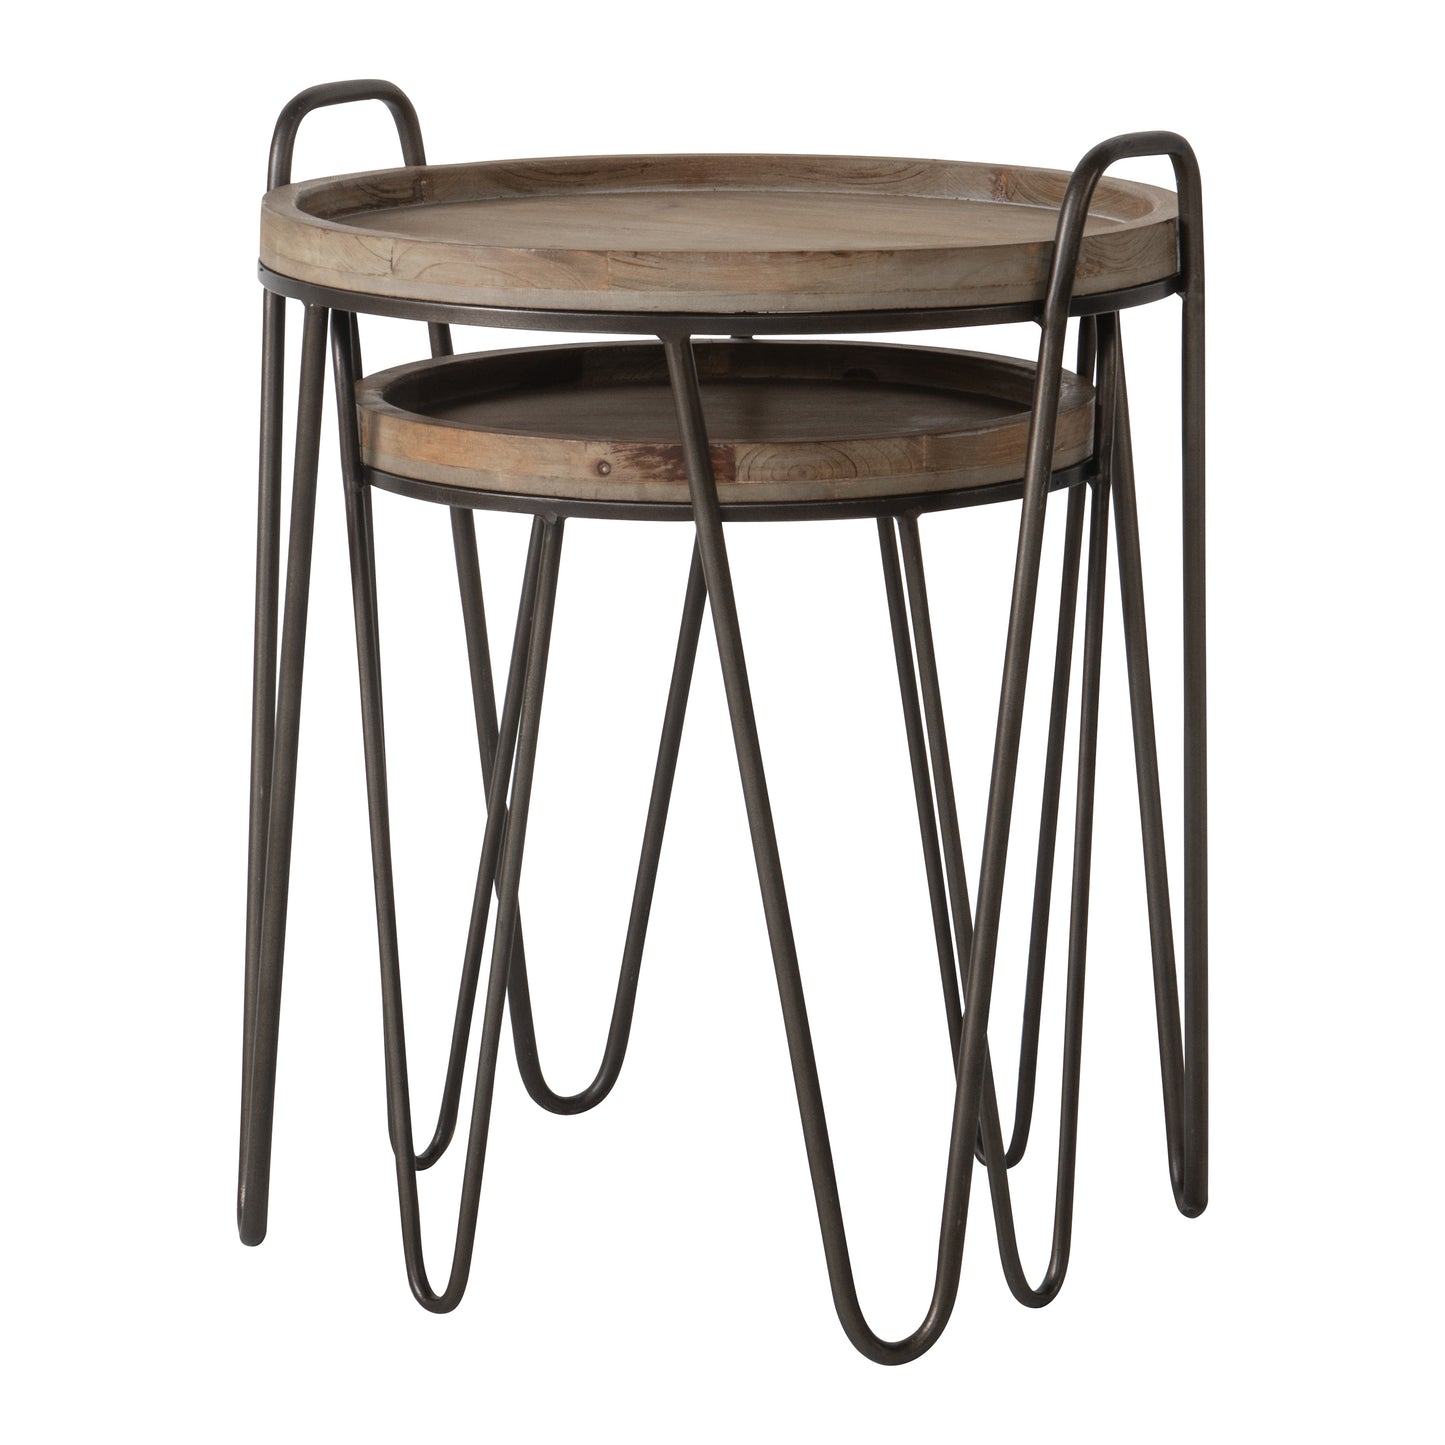 Two Nuffield Nest of 2 Tables505/410x490/395x920/510mm with hairpin legs for home furniture and interior decor.